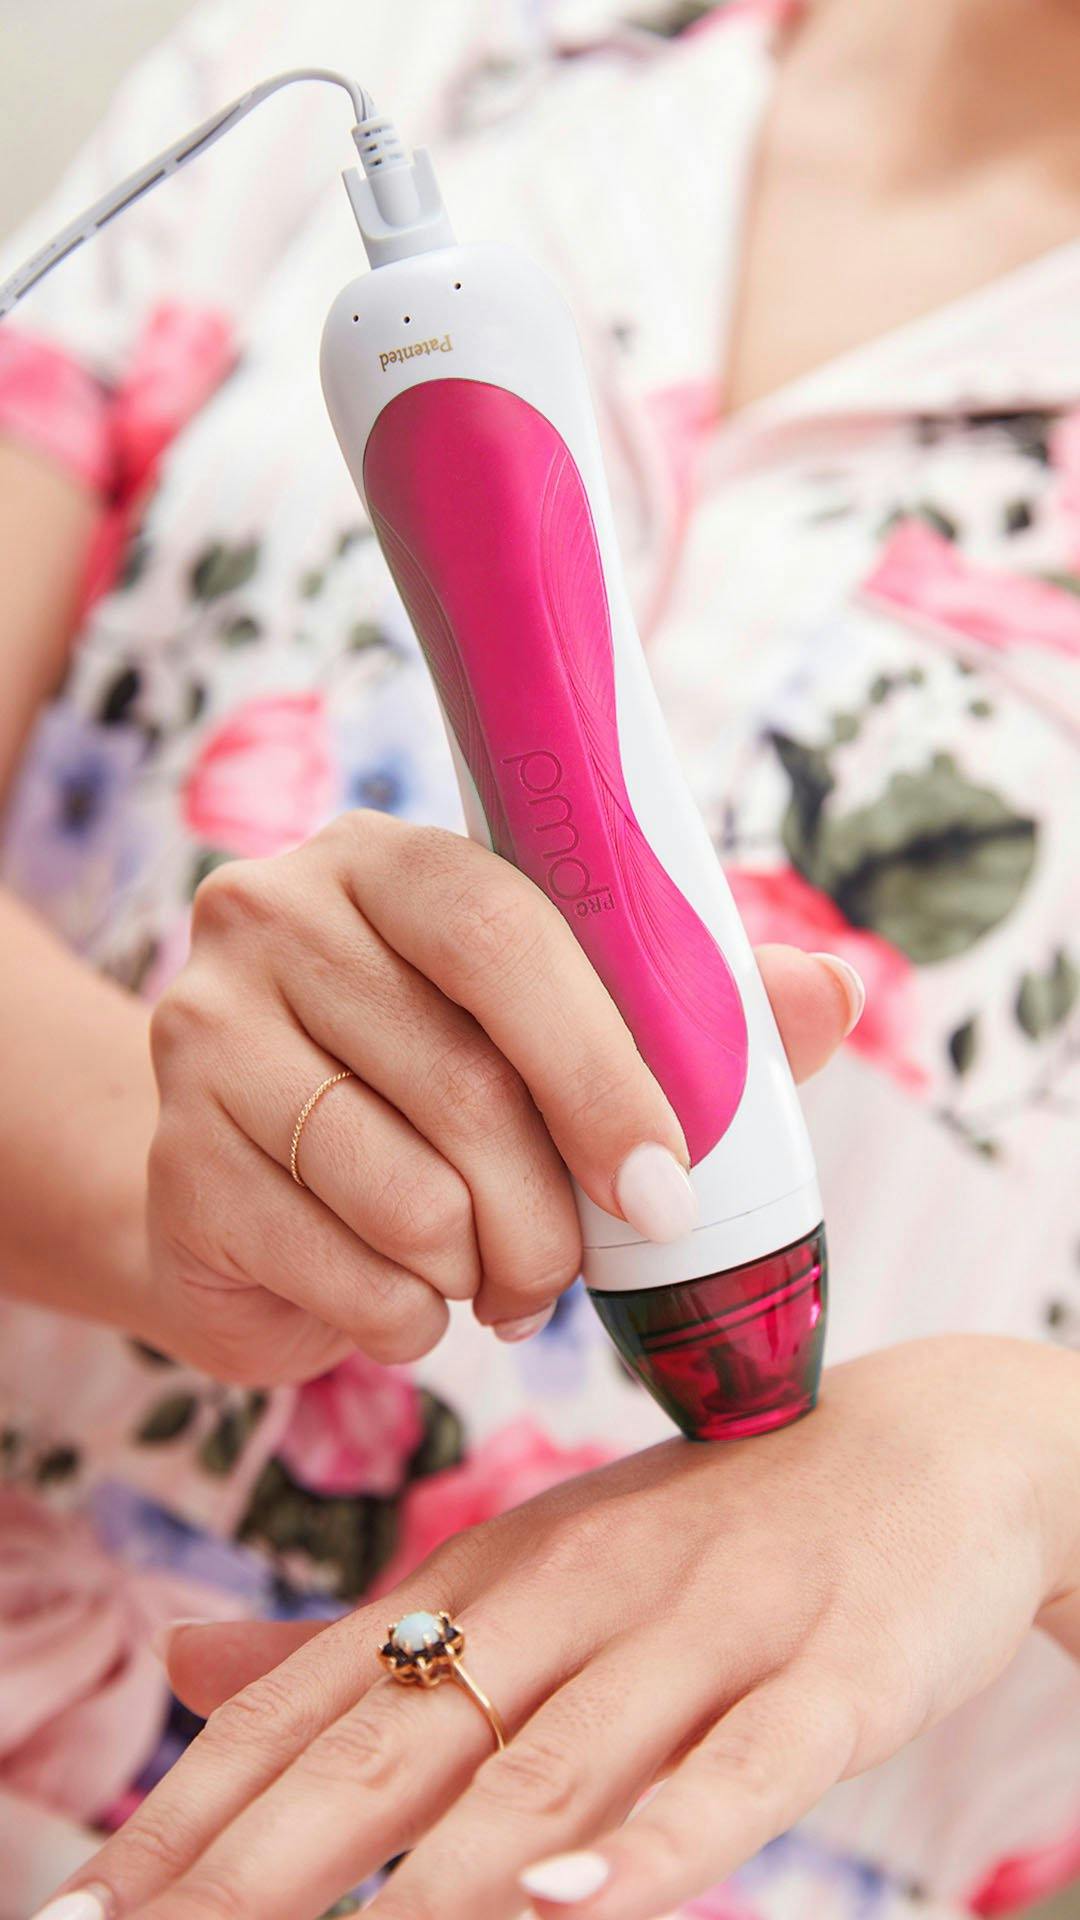 Personal Microderm Pro being used on woman's hand